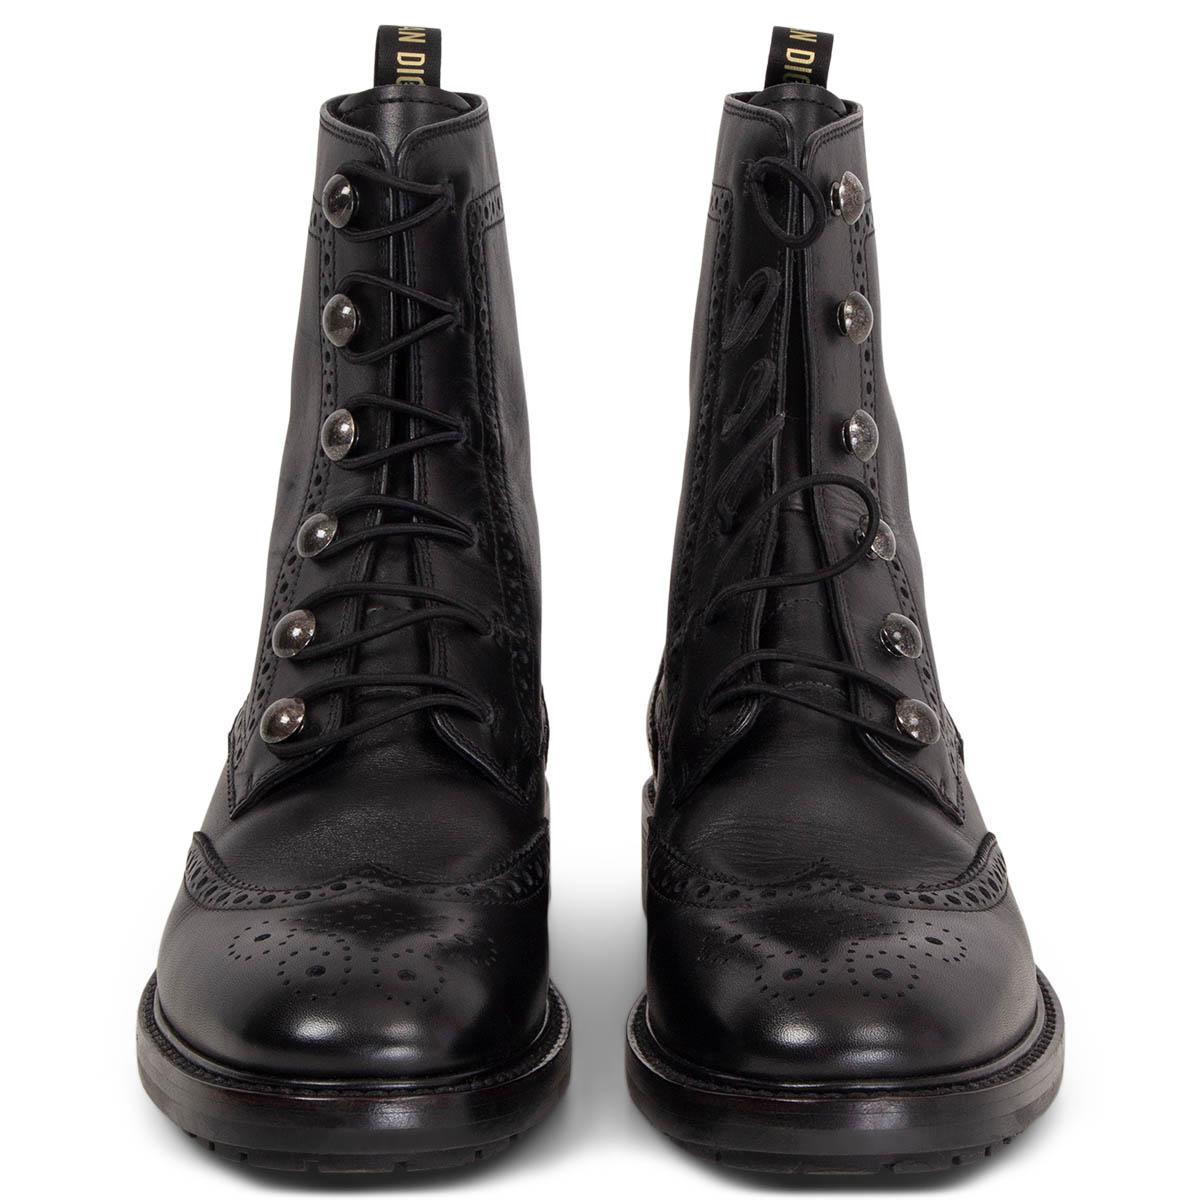 100% authentic Christian Dior Diorunit brogue combat ankle boots in black smooth calfskin with elastic lacing loops and logo pull tab at heel. Black rubber sole with signature white star. Have been worn once or twice and are in excellent condition.